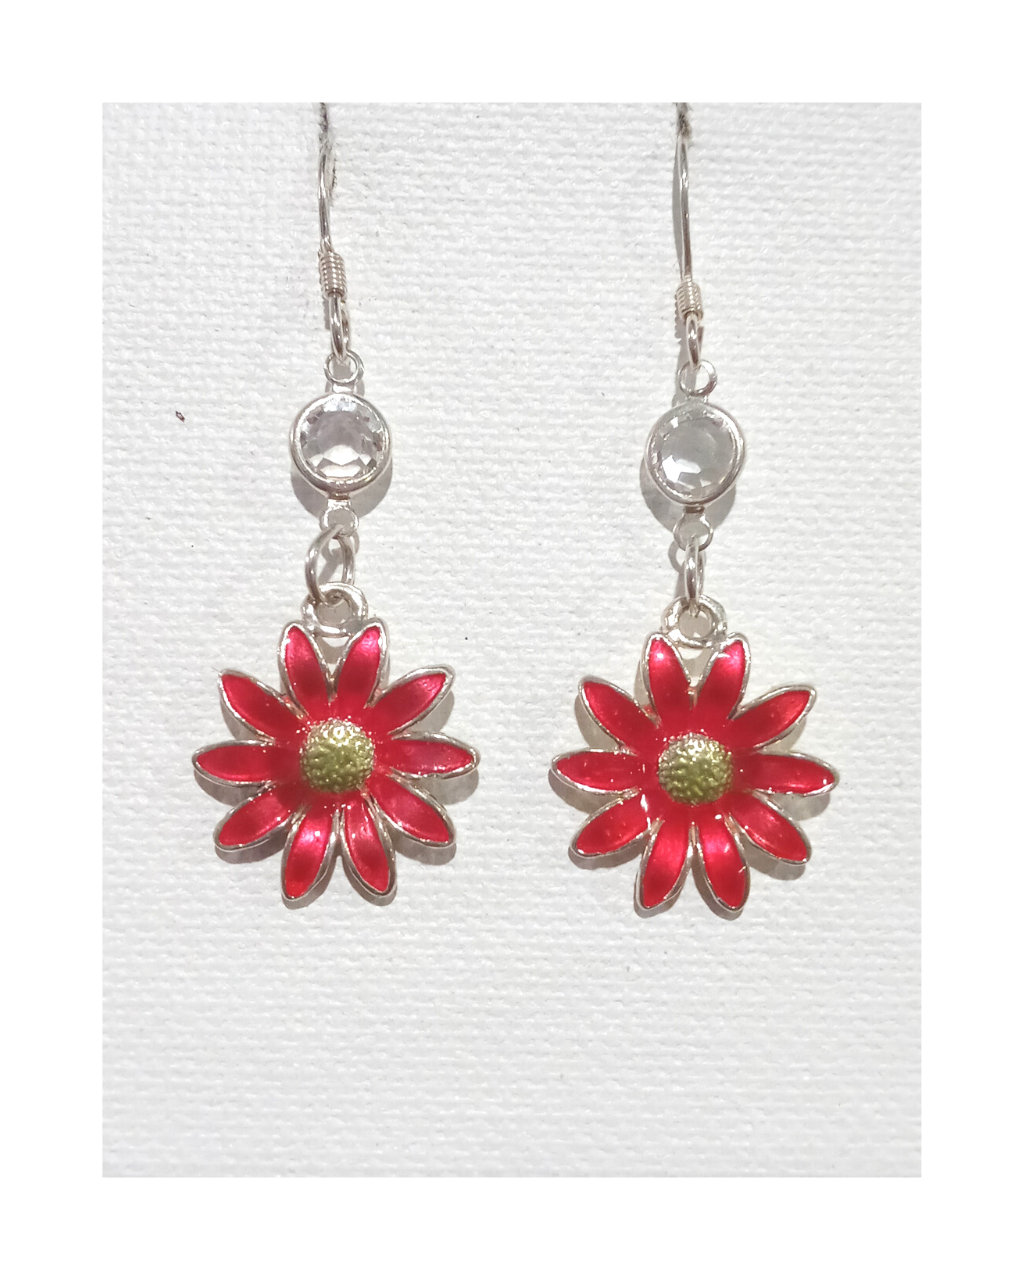 Sterling Gorgeous Exclusive Hand-enameled Pink Flower with Clear Swarovski Crystal Earrings 2 1/8"L X 3/4"W